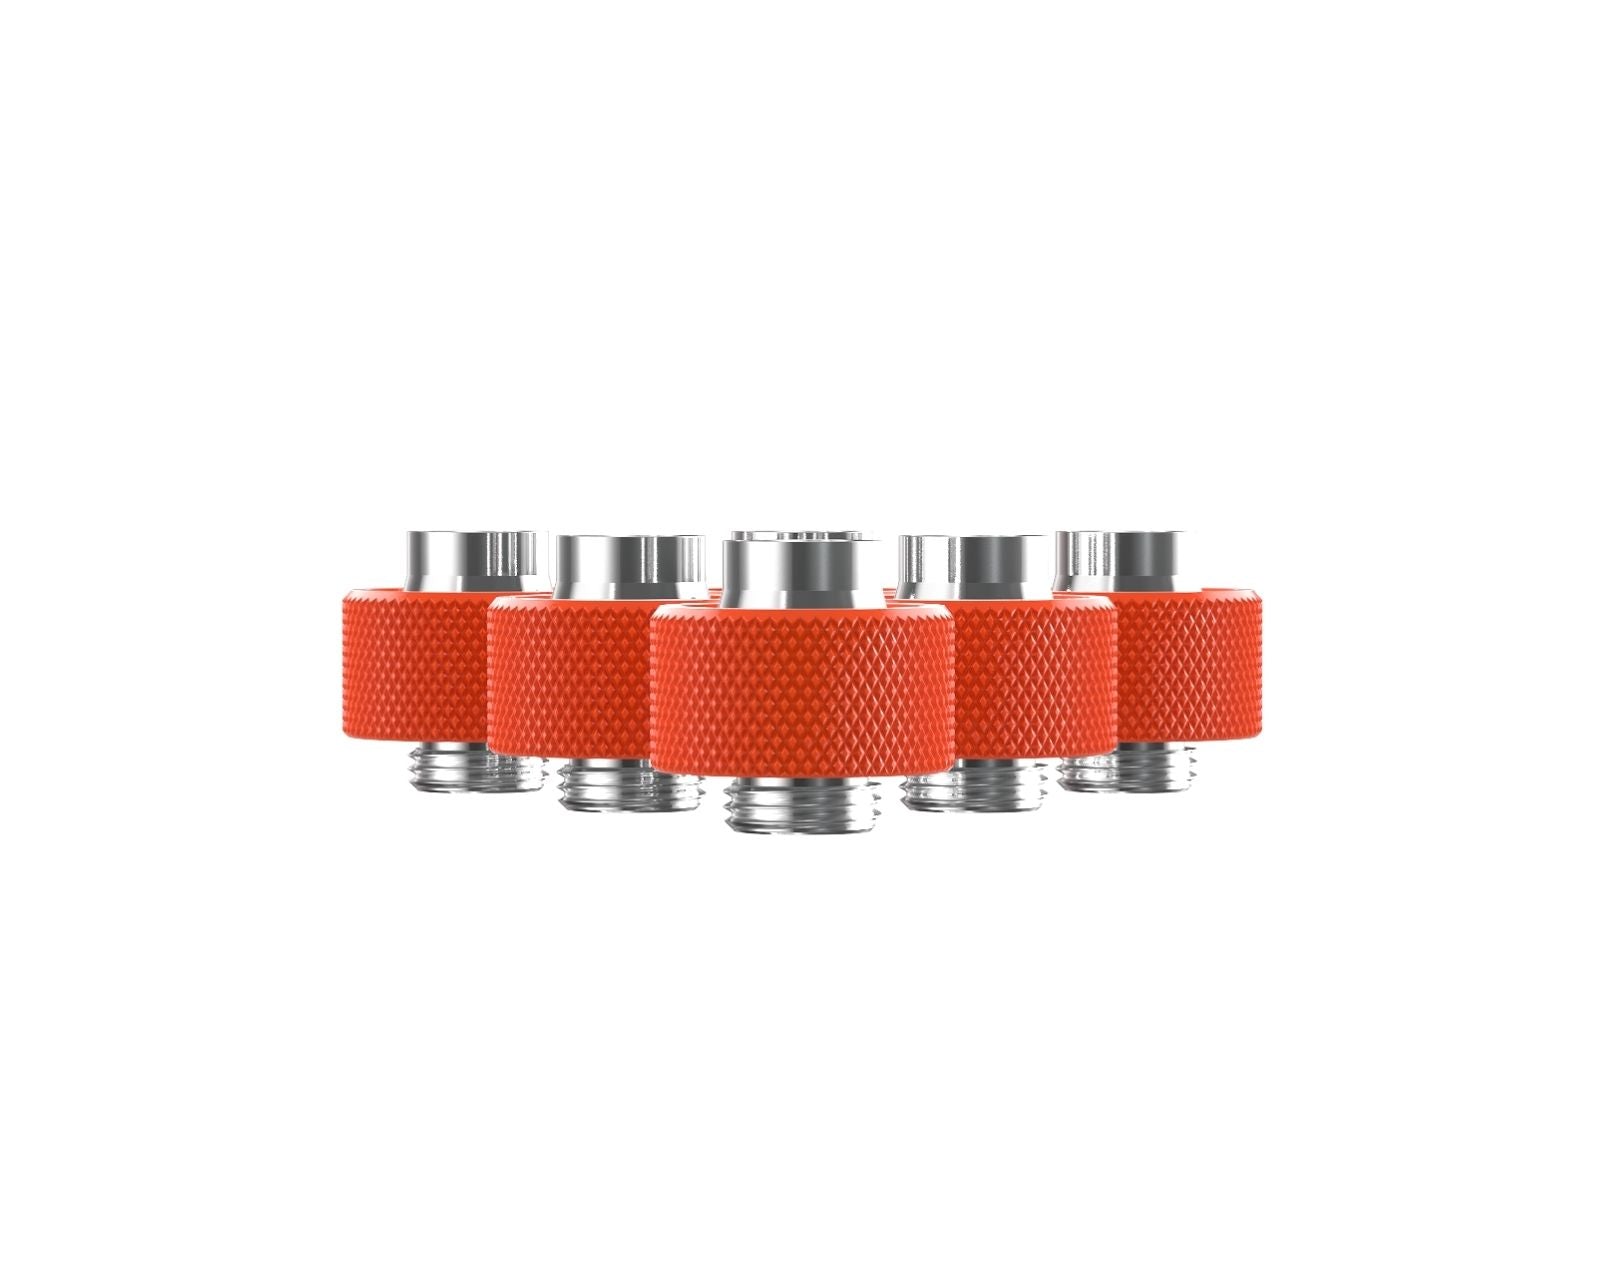 PrimoChill SecureFit SX - Premium Compression Fittings 6 Pack - For 1/2in ID x 3/4in OD Flexible Tubing (F-SFSX34-6) - Available in 20+ Colors, Custom Watercooling Loop Ready - UV Orange